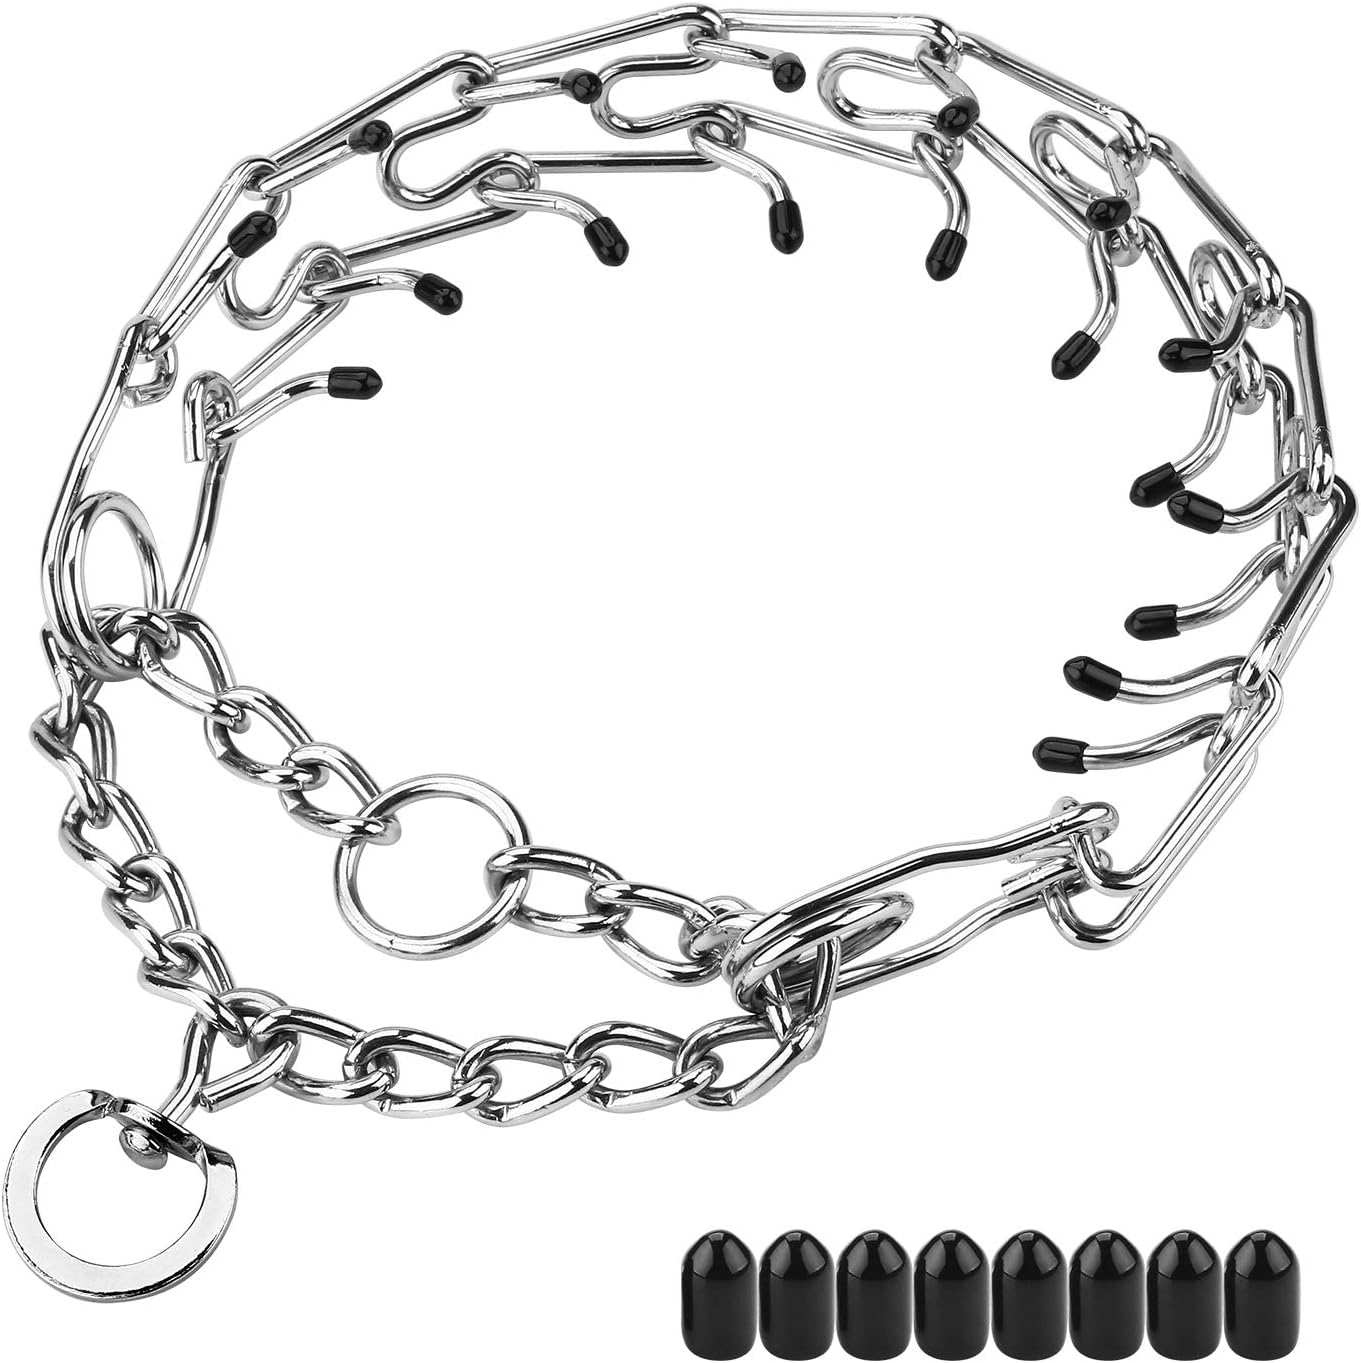 Aheasoun Prong Collar for Dogs, Dog Prong Collar, Pinch Collar for Dogs, Dog Training Collar, Large Medium and Small Dogs, Stainless Steel Adjustable with Comfort Rubber Tips (Large, 4.0mm, 23.6-Inch)